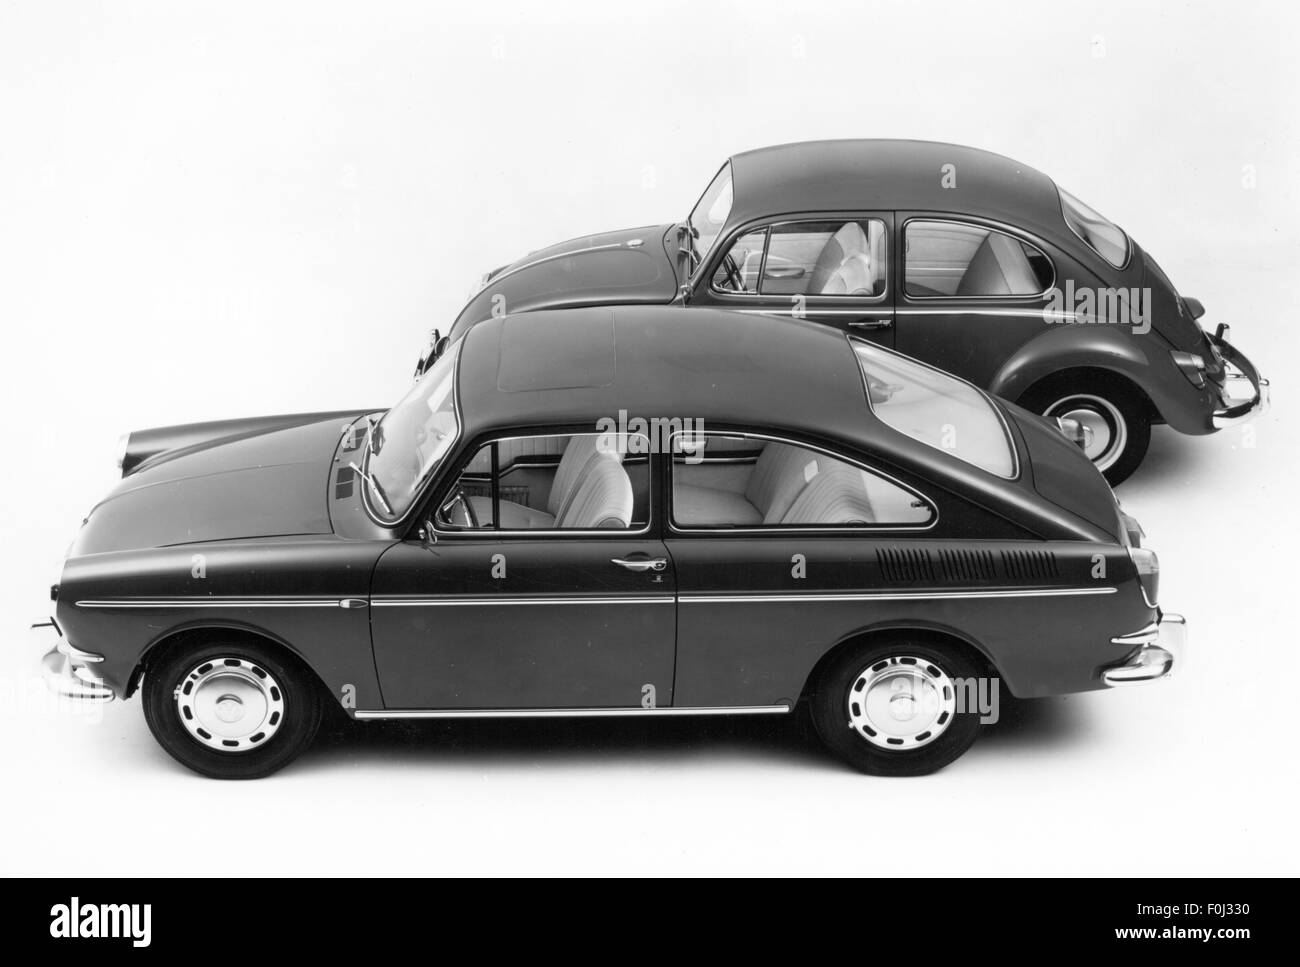 transport / transportation, car, vehicle variants, Volkswagen, VW 1600 TL, VW 1300 beetle, mid 1960s, Additional-Rights-Clearences-Not Available Stock Photo